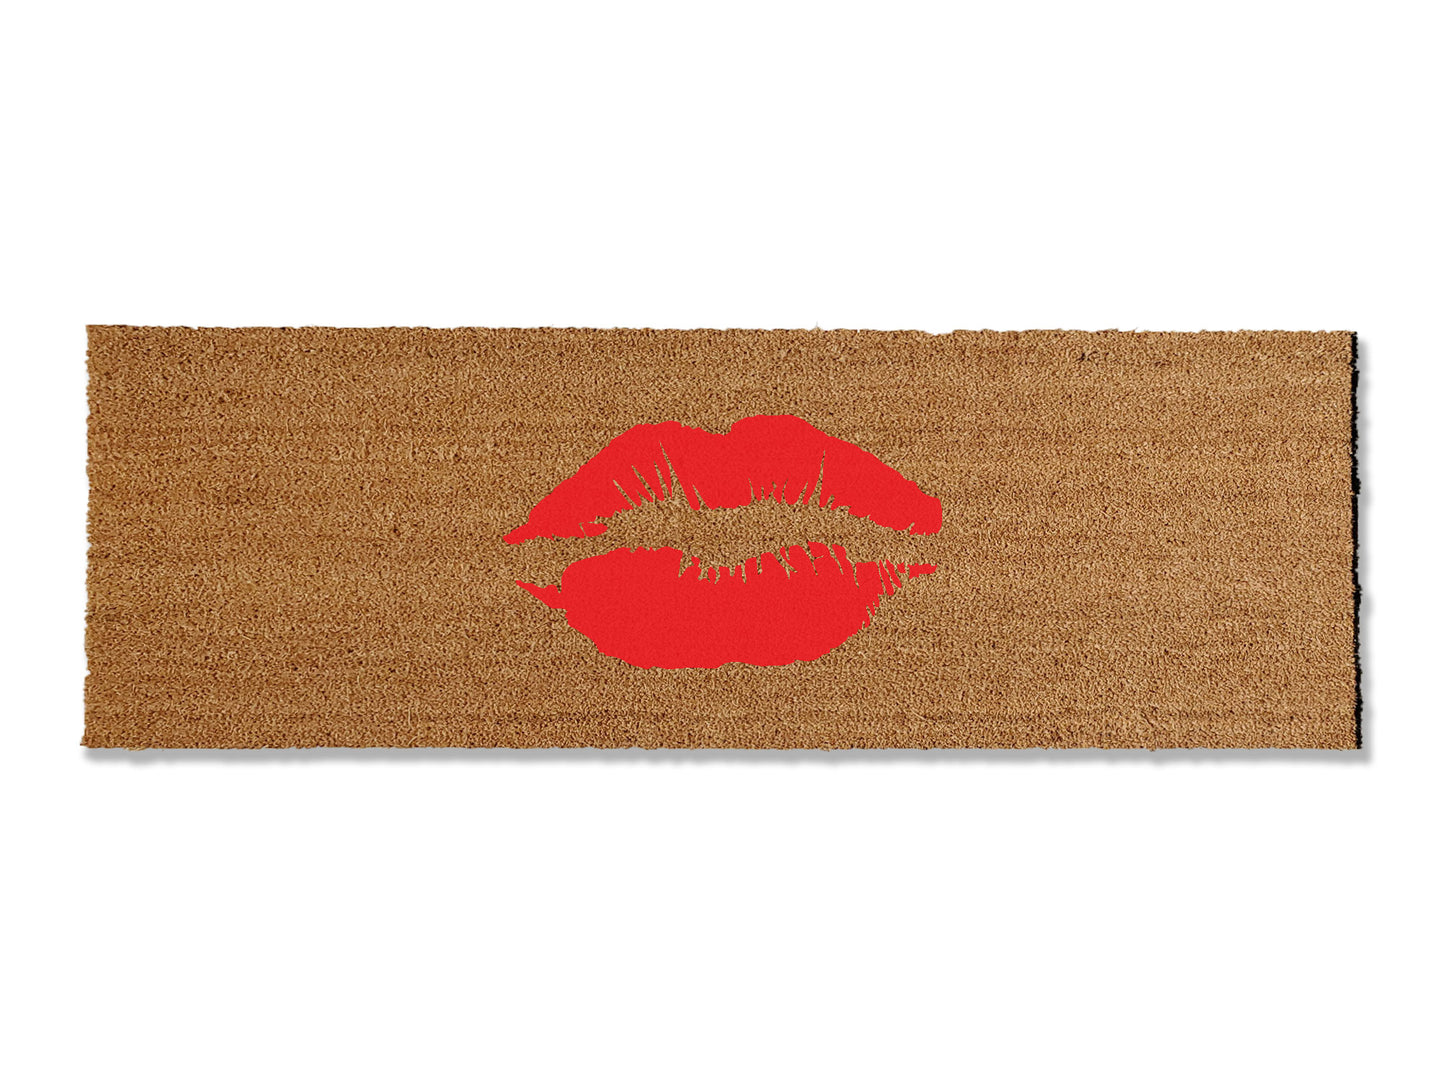 Make a chic statement with our coir doormat featuring a playful lipstick smooch. Available in multiple colors and sizes, this trendy mat adds a touch of glamour to your doorstep. Beyond style, it excels at trapping dirt, making it a functional and fashionable addition to your entryway.